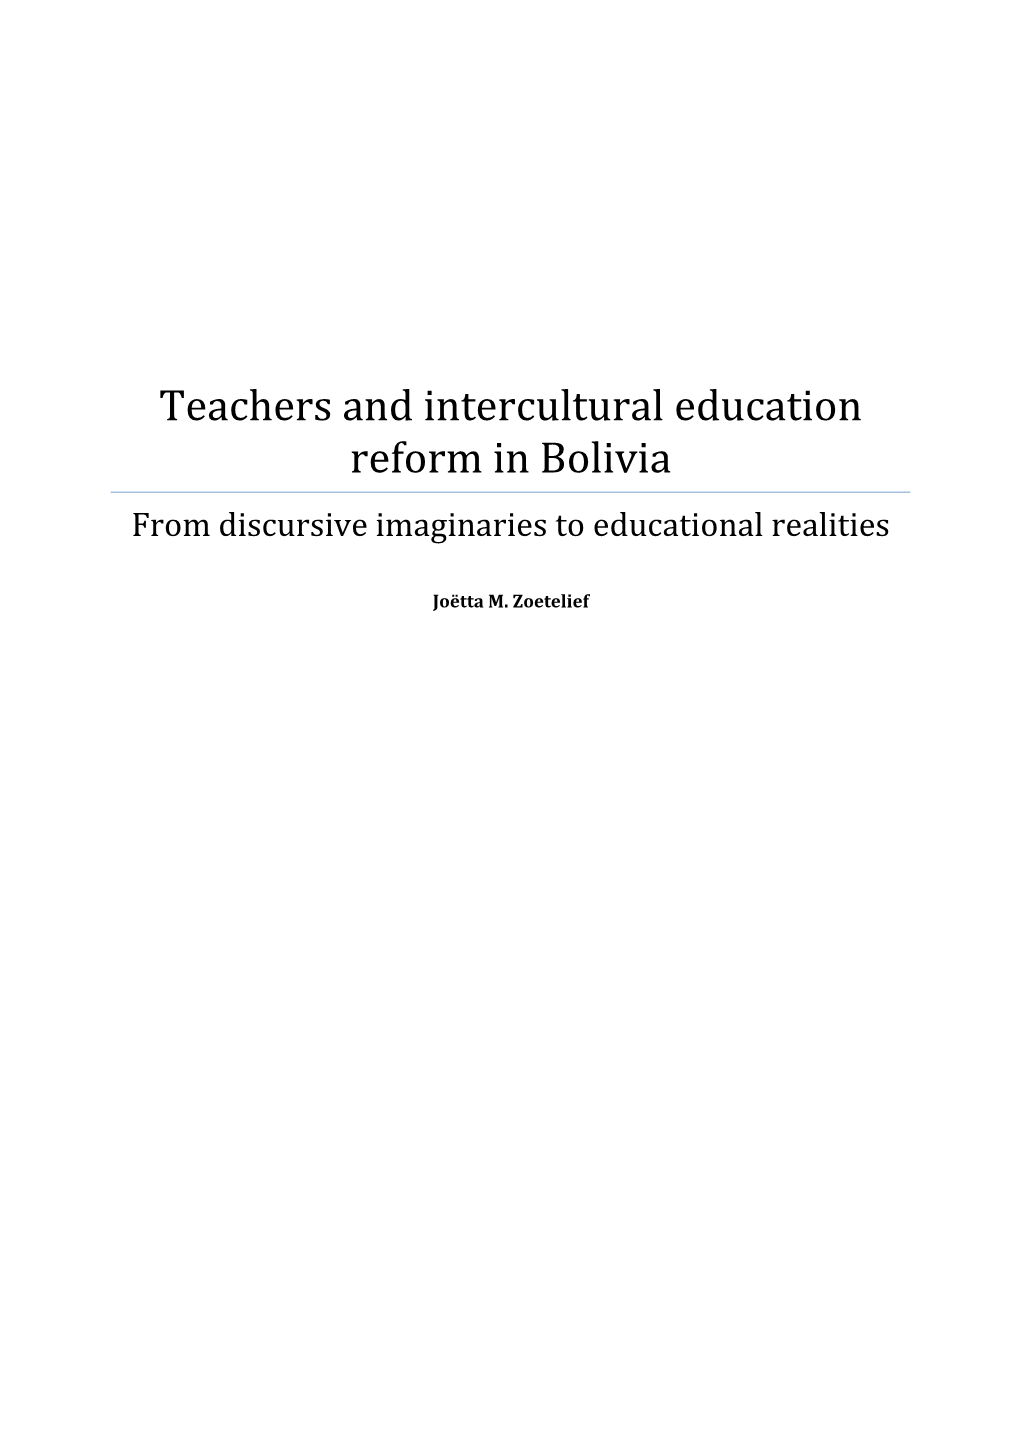 Teachers and Intercultural Education Reform in Bolivia from Discursive Imaginaries to Educational Realities